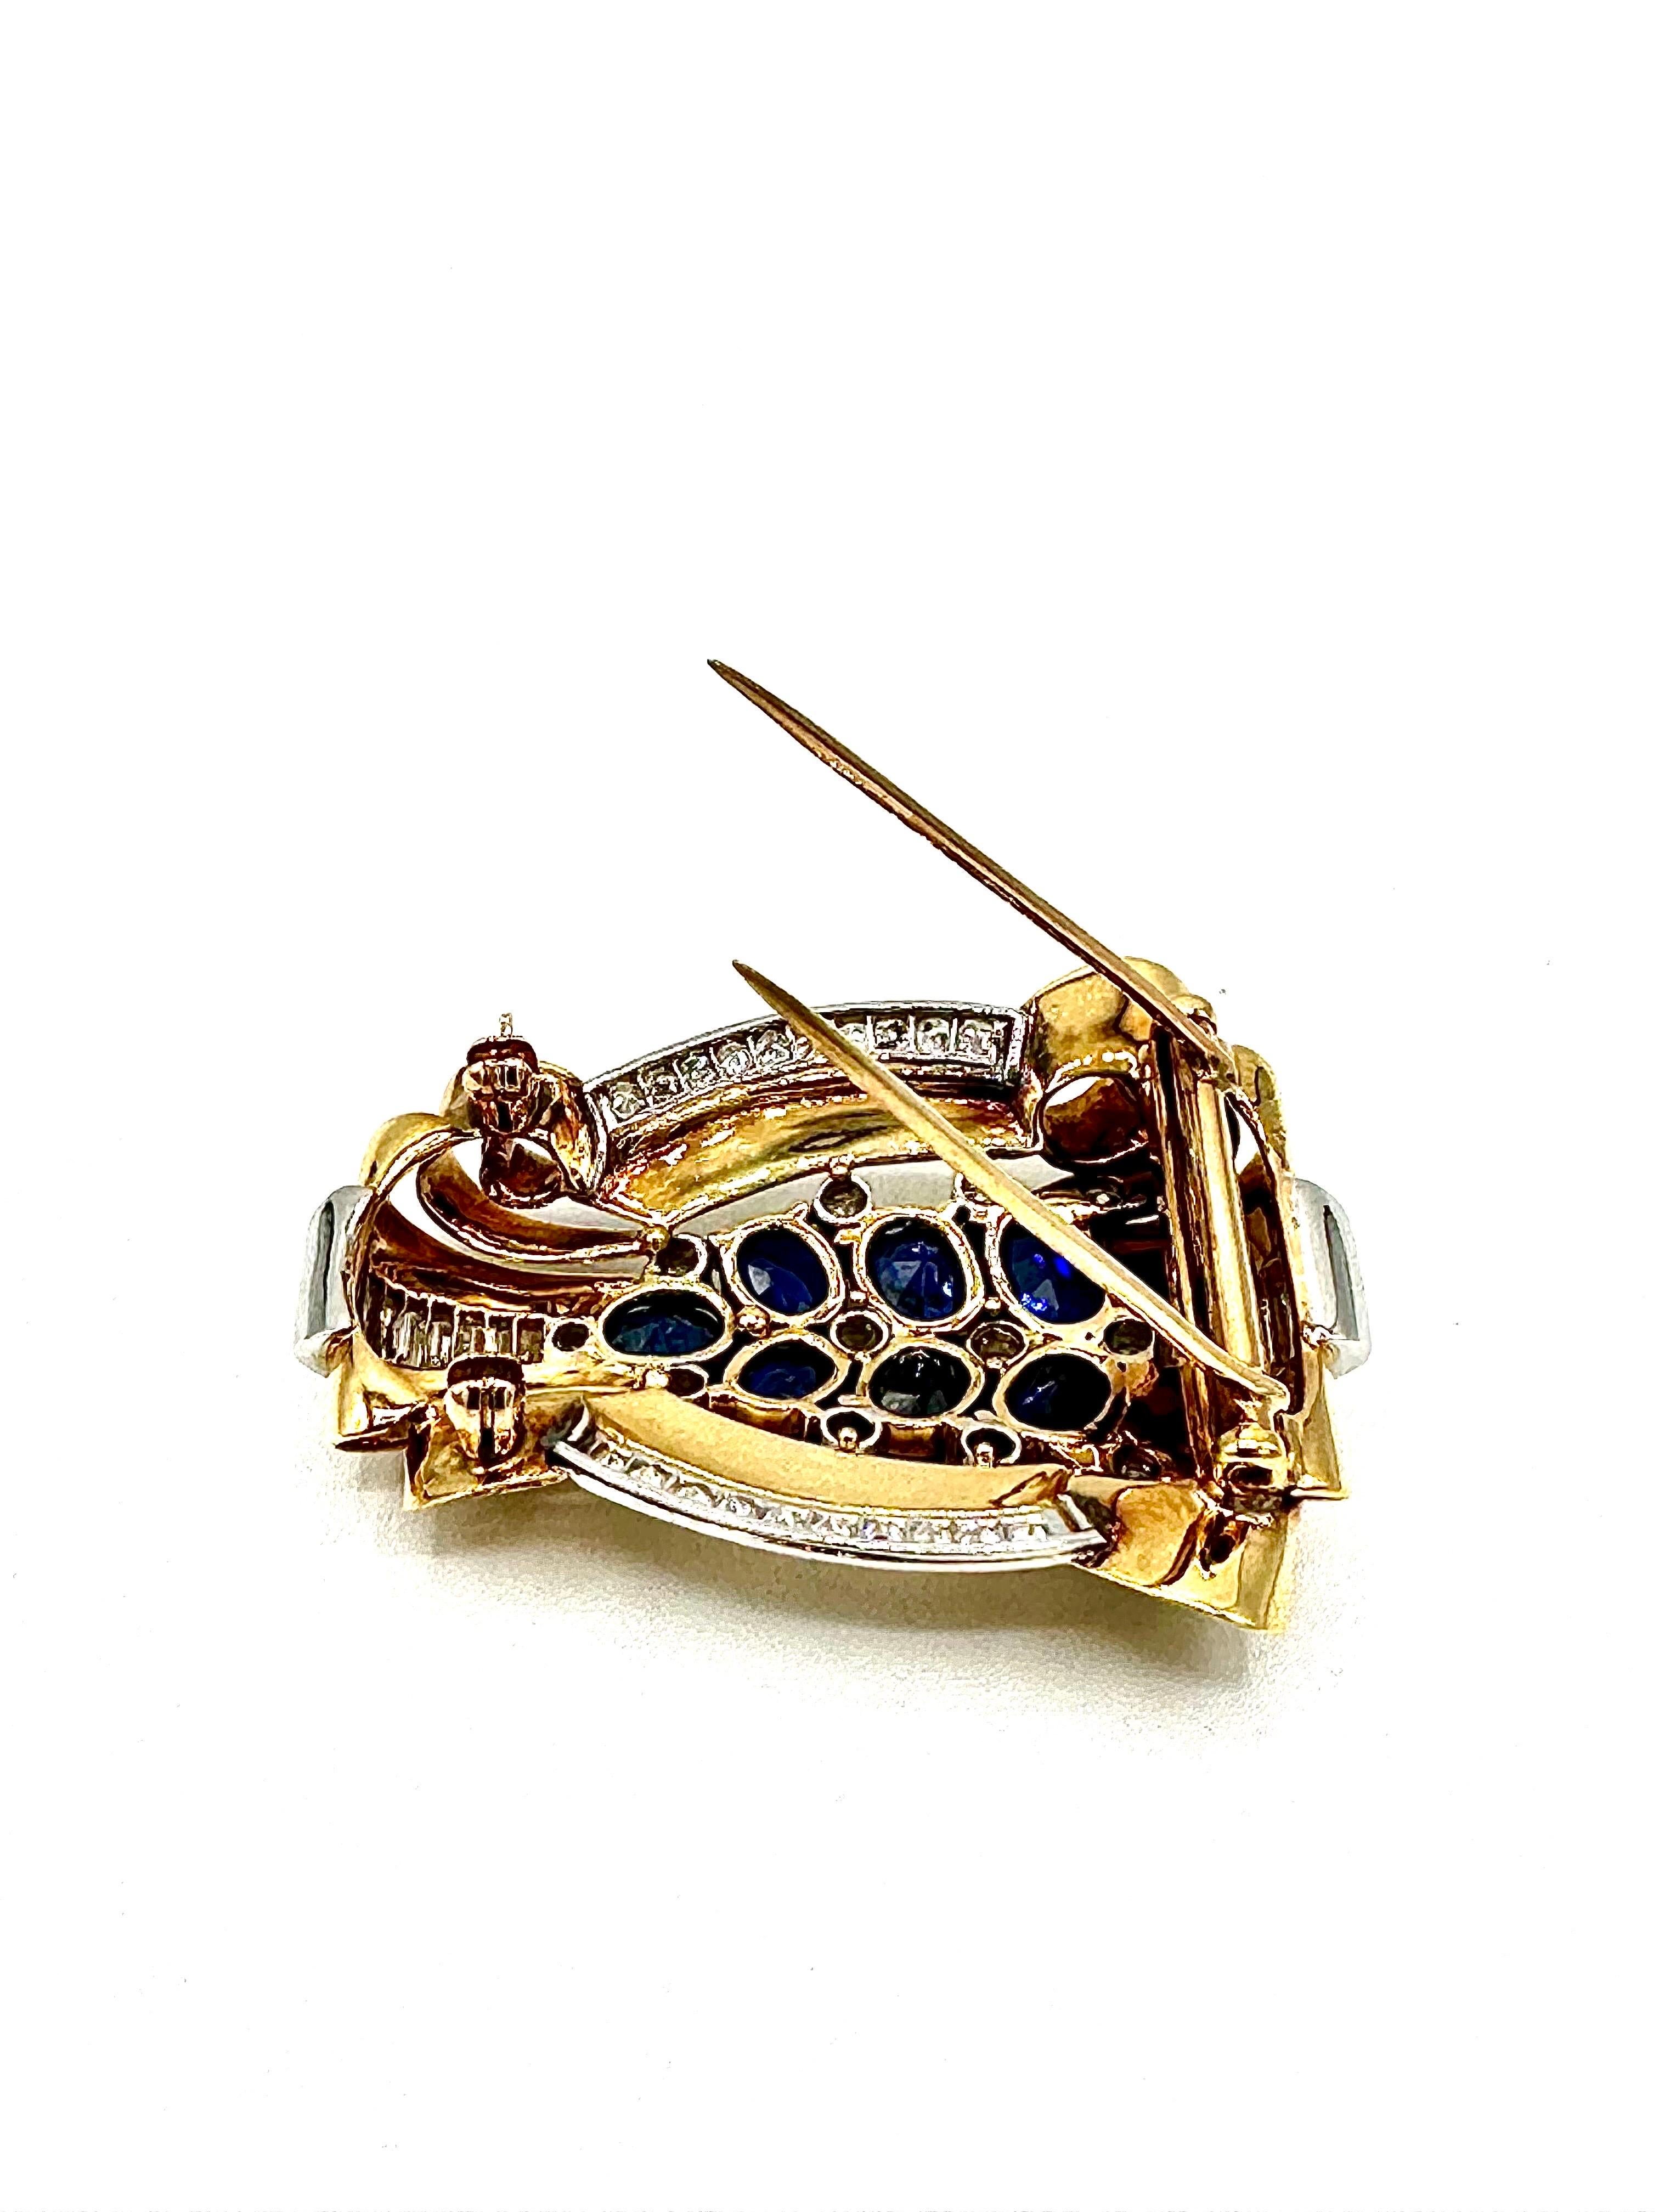 Tiffany & Co. Retro Sapphire and Diamond 18K Yellow Gold Brooch For Sale 1